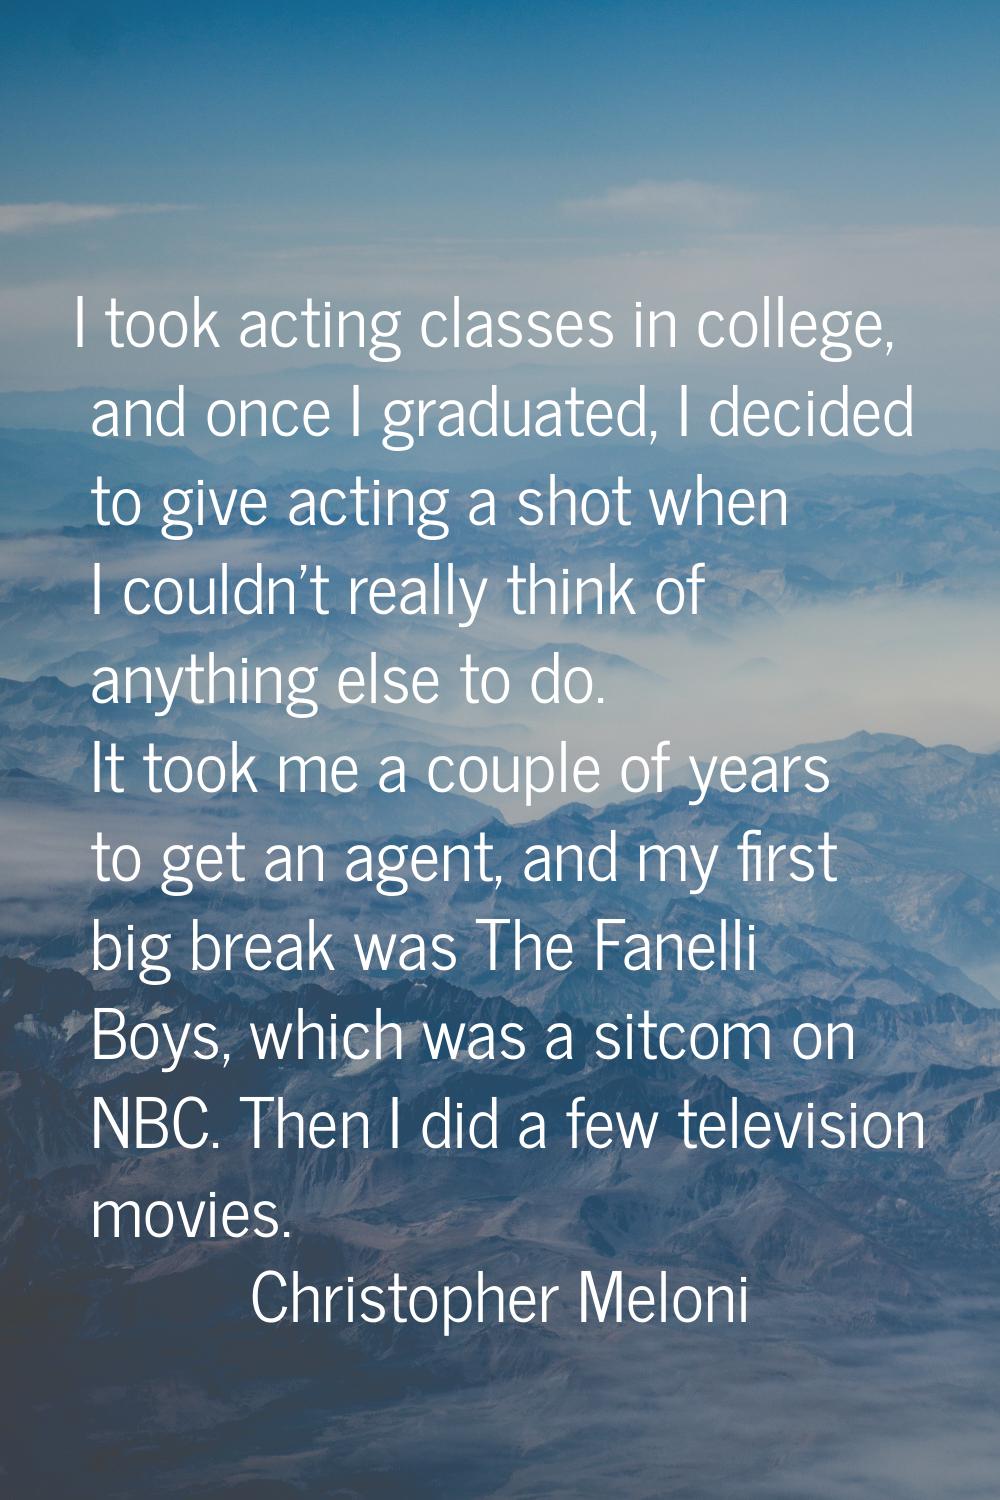 I took acting classes in college, and once I graduated, I decided to give acting a shot when I coul